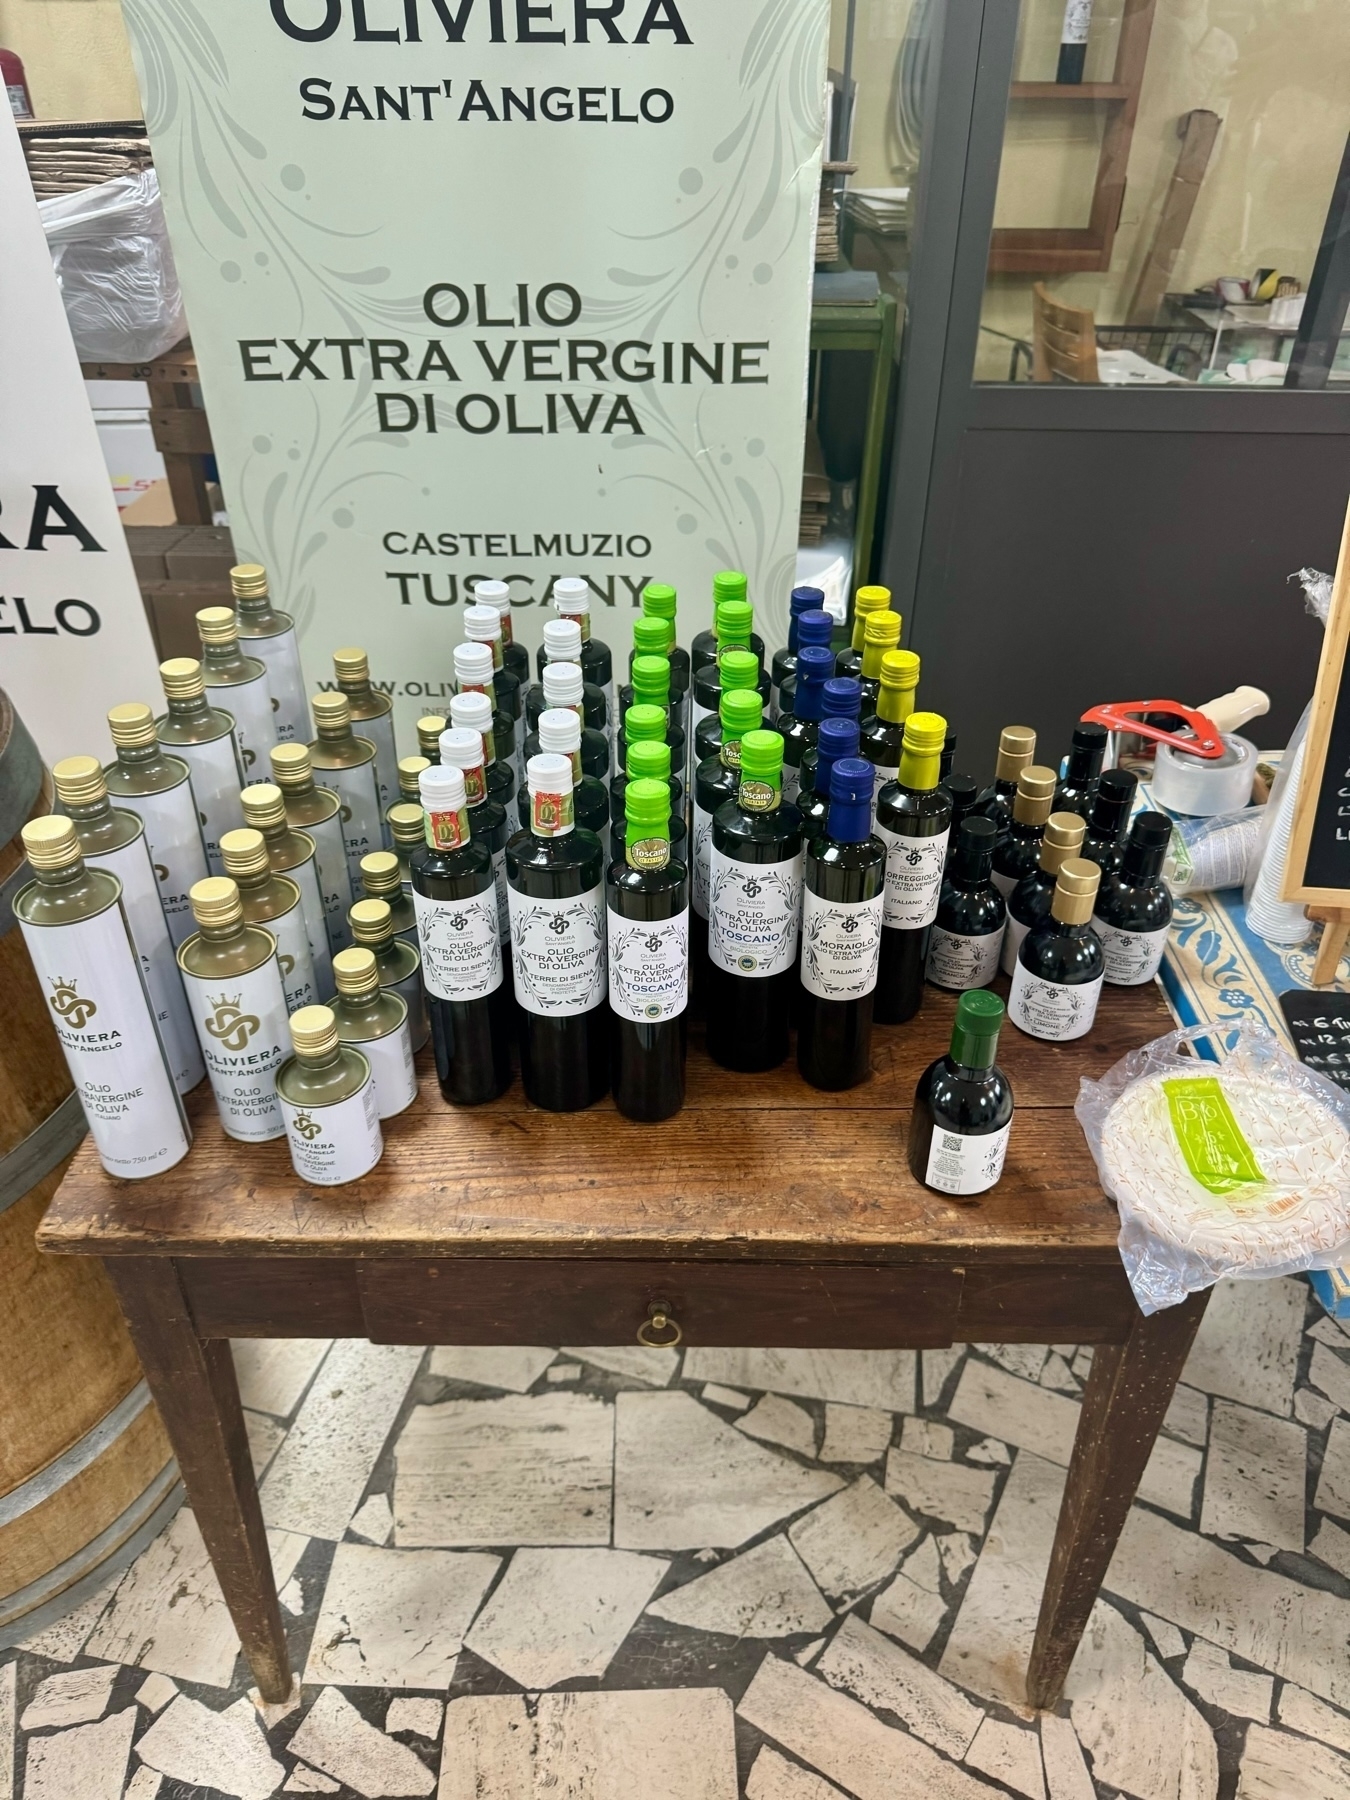 The image shows a display of various bottles of extra virgin olive oil on a small wooden table. The bottles are of different sizes and have different colored caps.